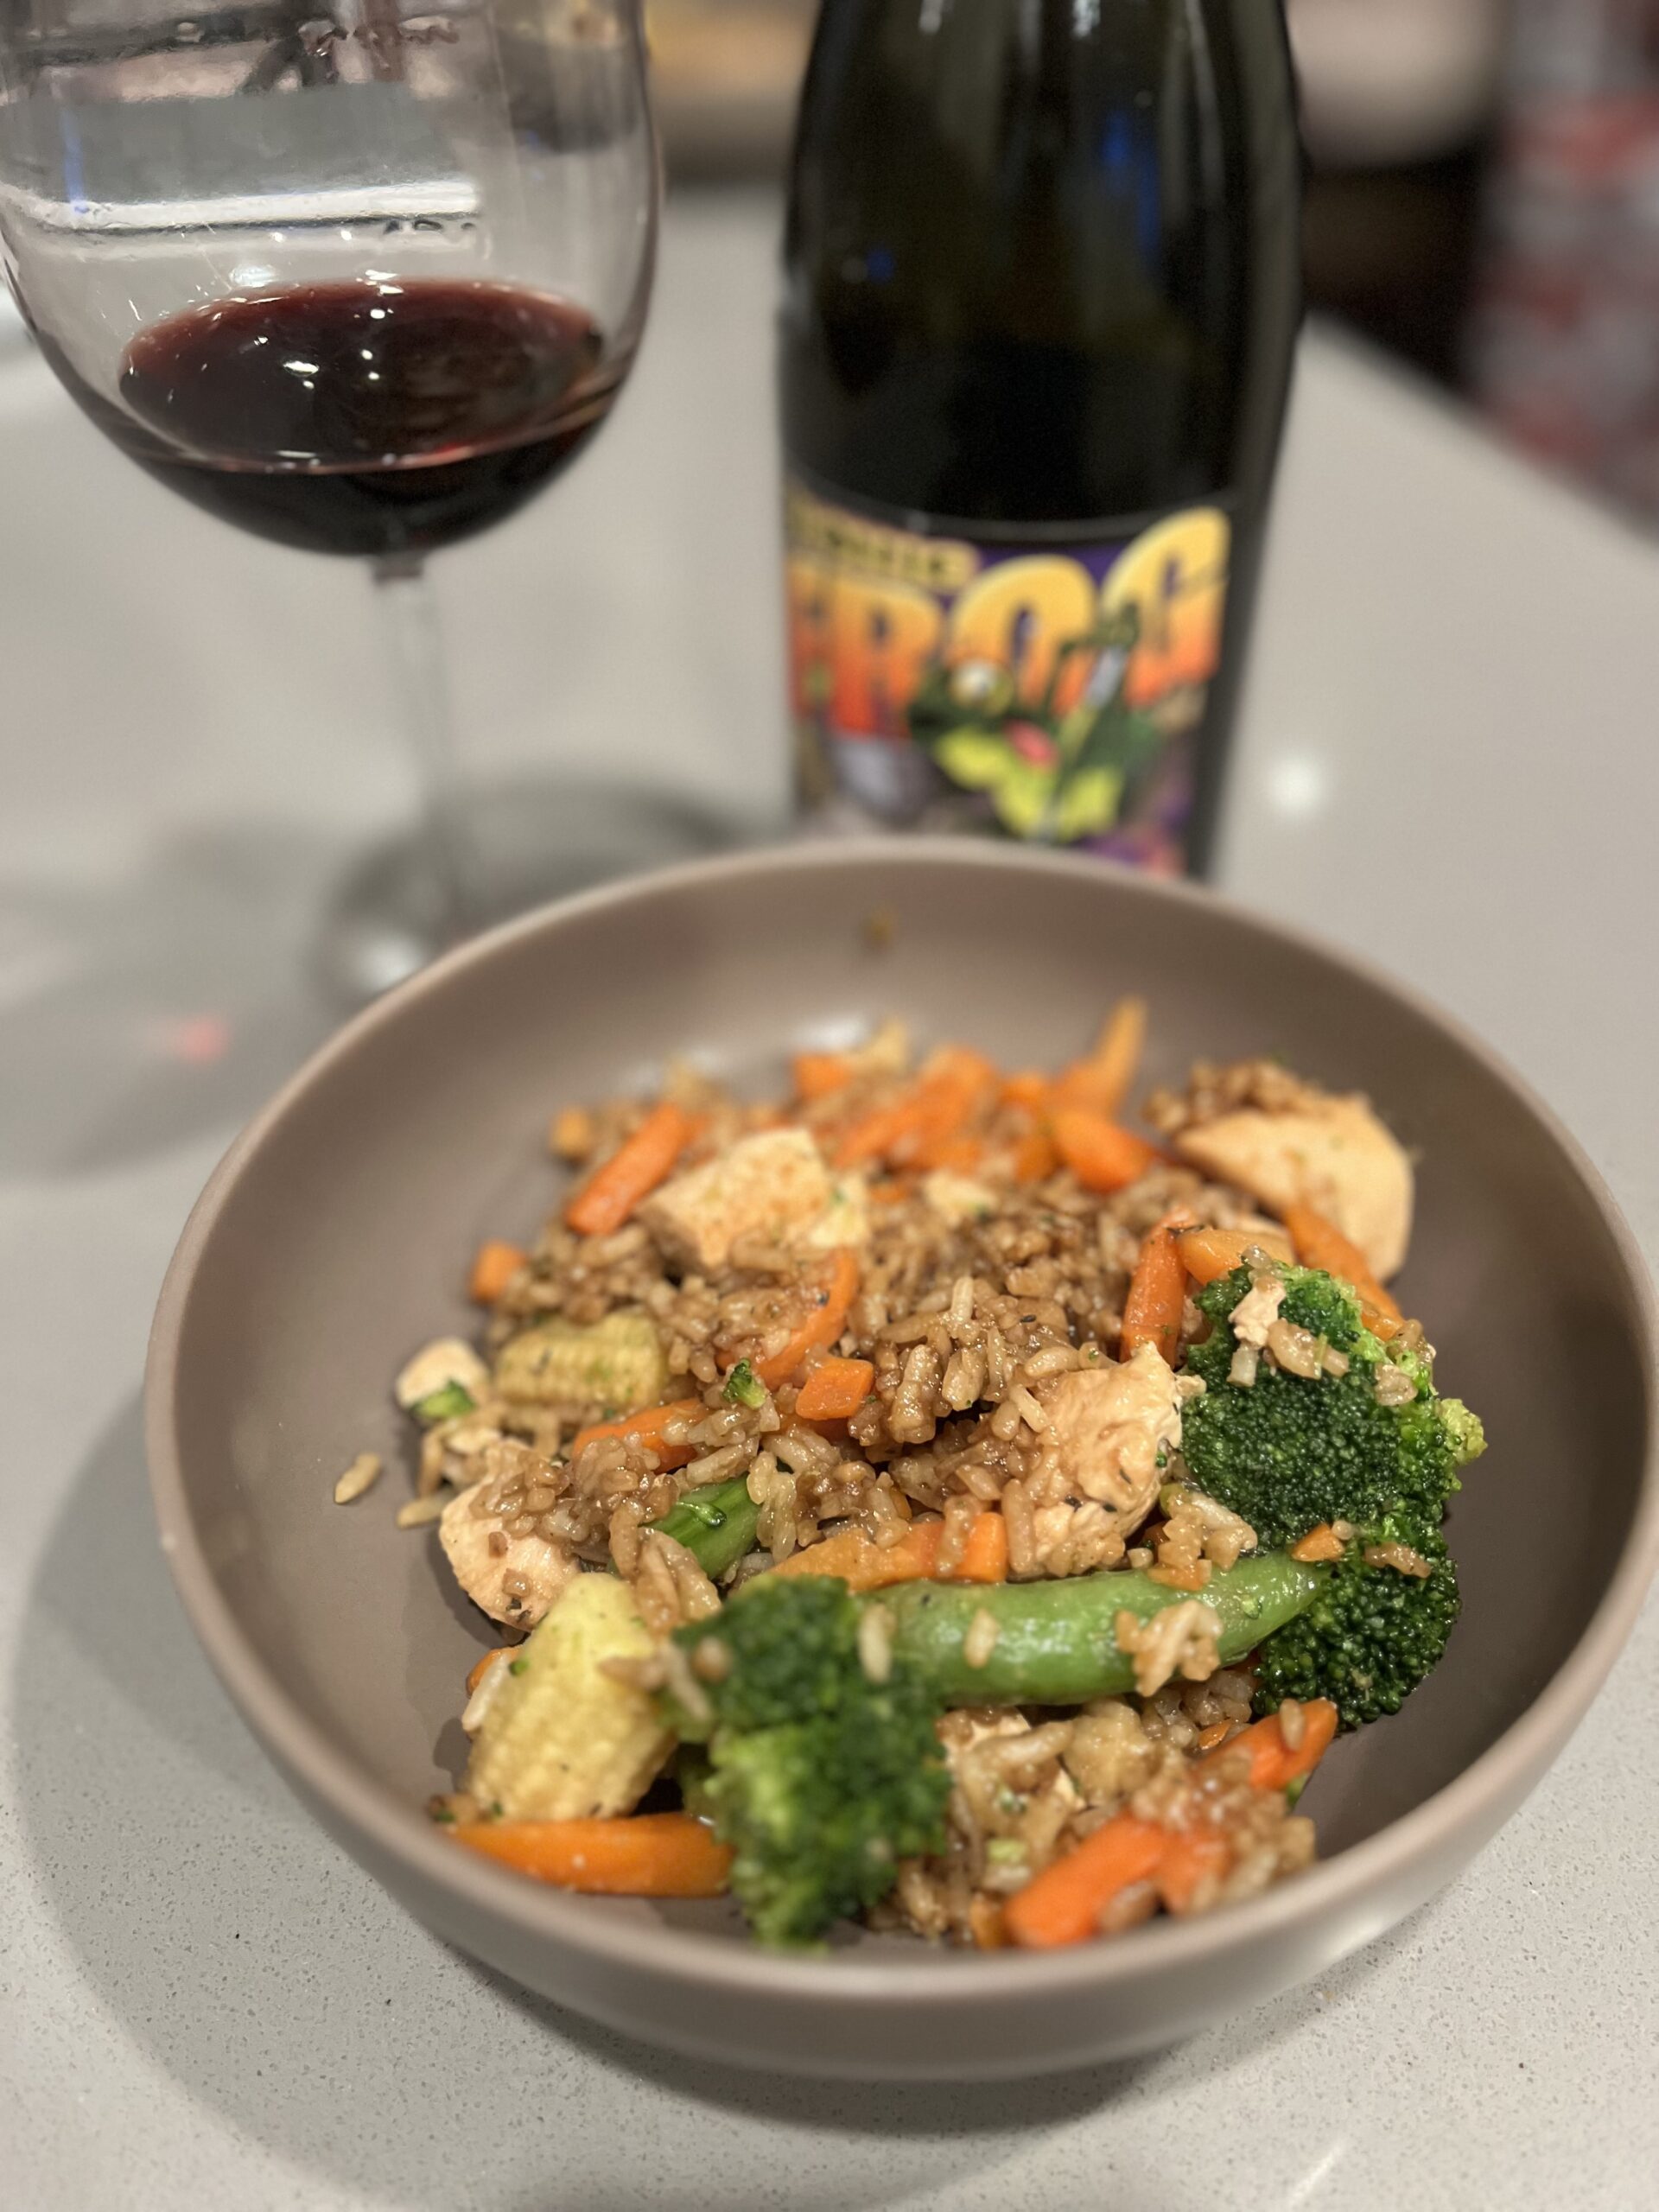 bionic frog wine and fried rice